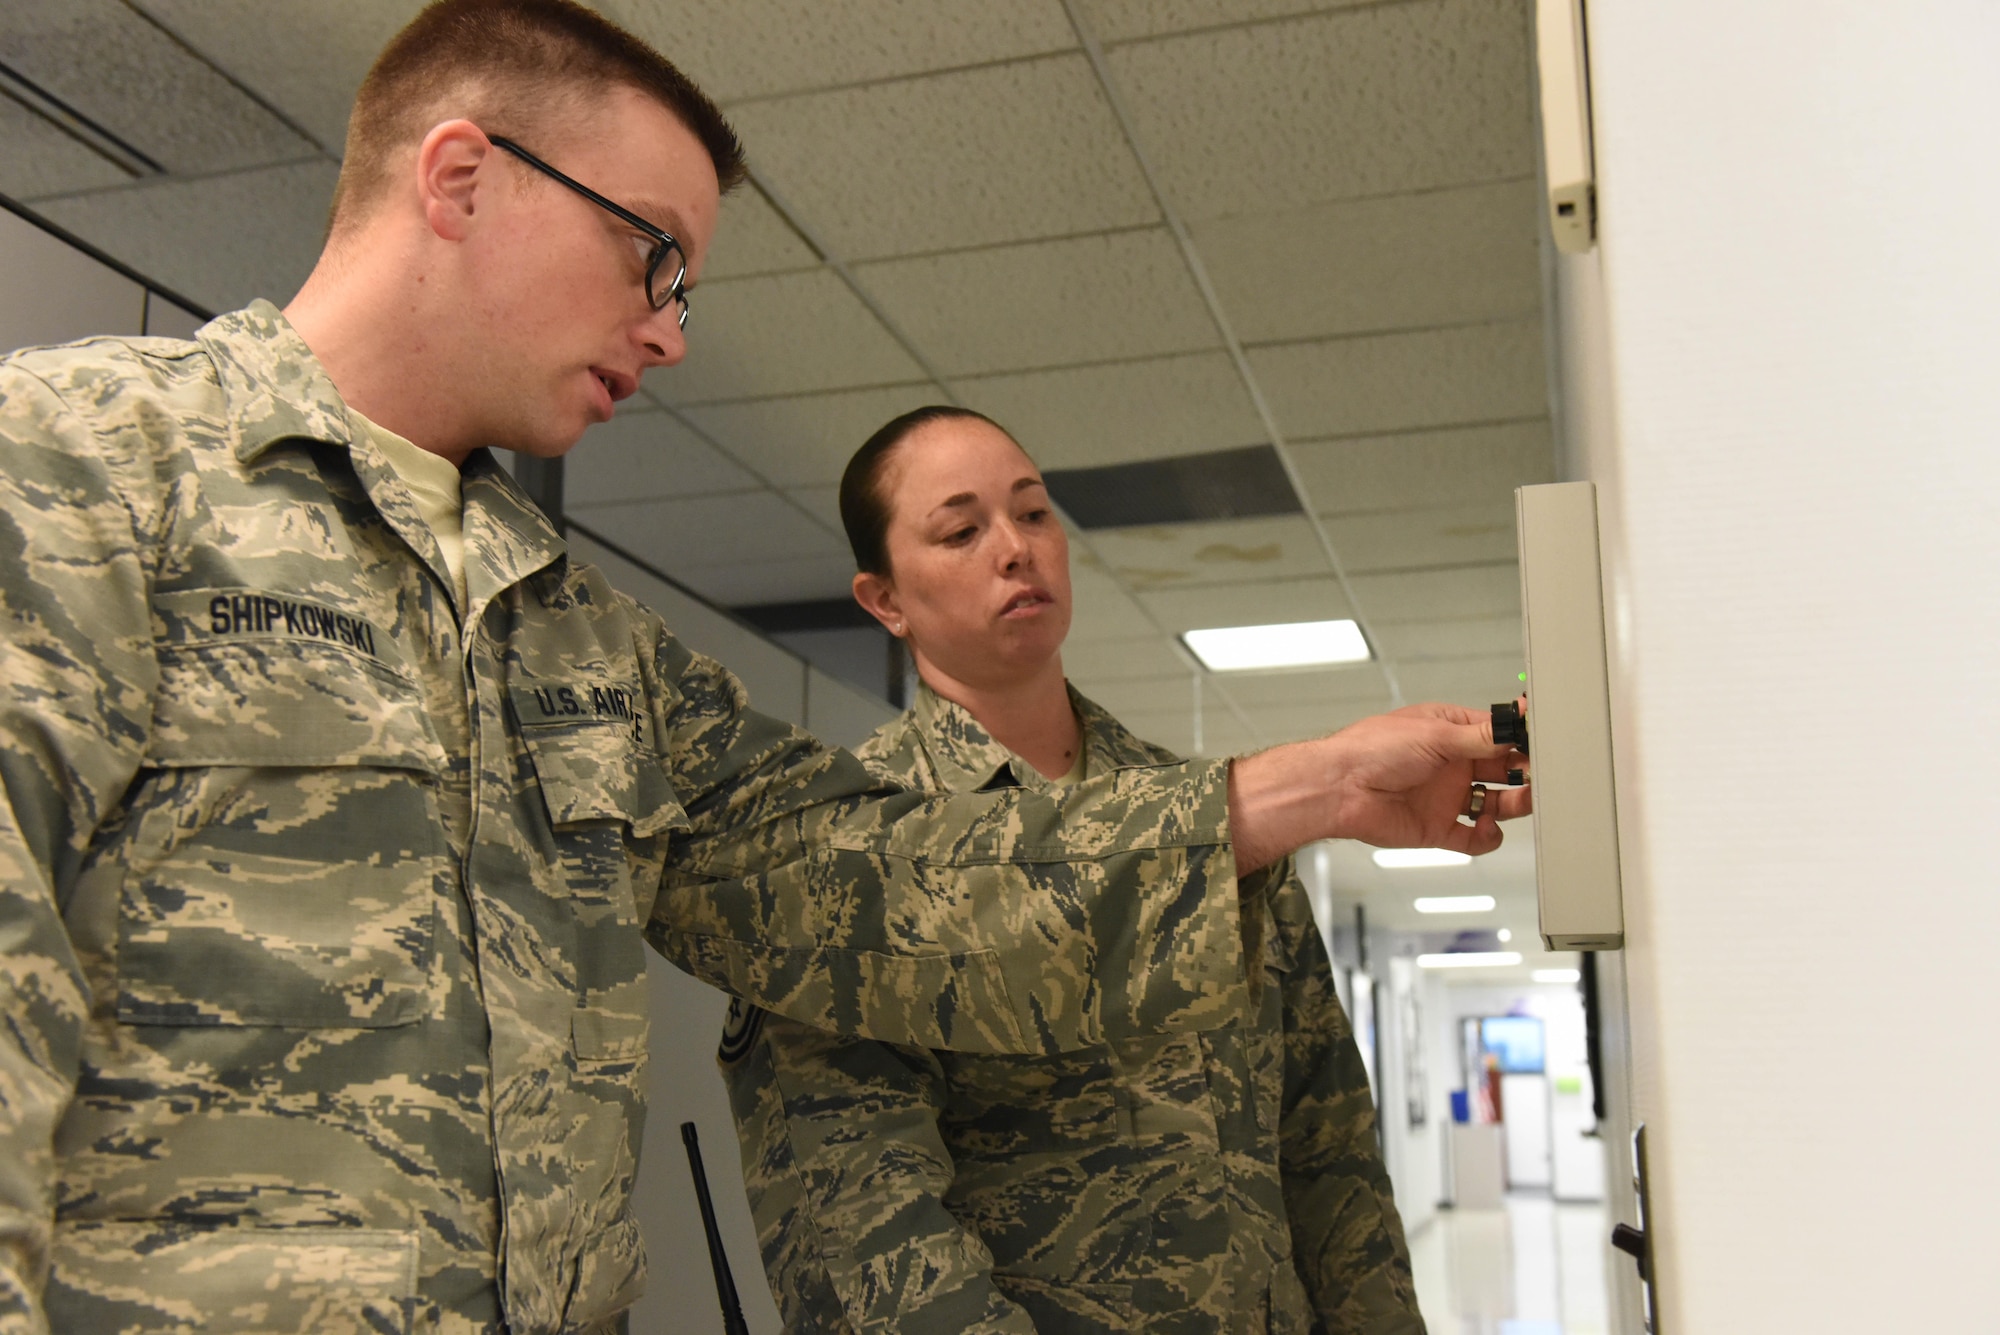 Tech. Sgt. Kurt Shipkowski, 193rd Special Operations Wing, Force Support Squadron, noncommission officer in charge of career development, works with Master Sgt. Jamie Wolf, 193rd SOW, installation emergency management manager, to utilize the building’s mass notification system to notify Airmen of the active shooter during the active shooter exercise on base, May 25, 2017. Wolf and the wing inspection team worked to evaluate how wing members initiate the notification of an active shooter as well as how they react. (U.S. Air National Guard photo by Tech. Sgt. Claire Behney/Released)